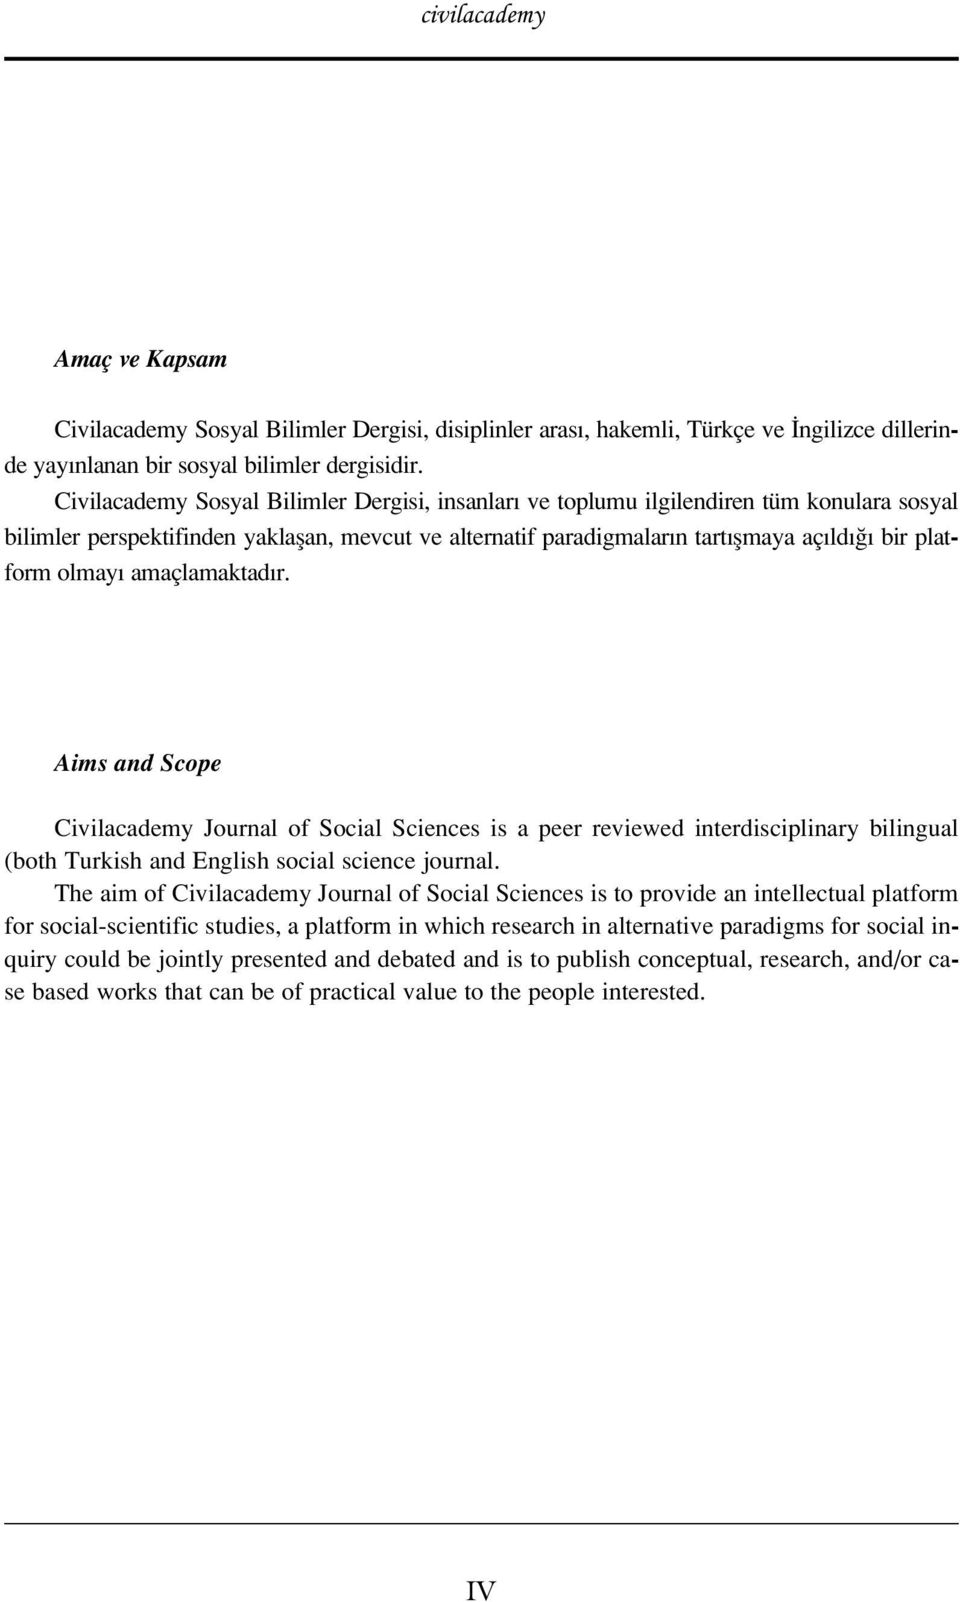 amaçlamaktad r. Aims and Scope Civilacademy Journal of Social Sciences is a peer reviewed interdisciplinary bilingual (both Turkish and English social science journal.